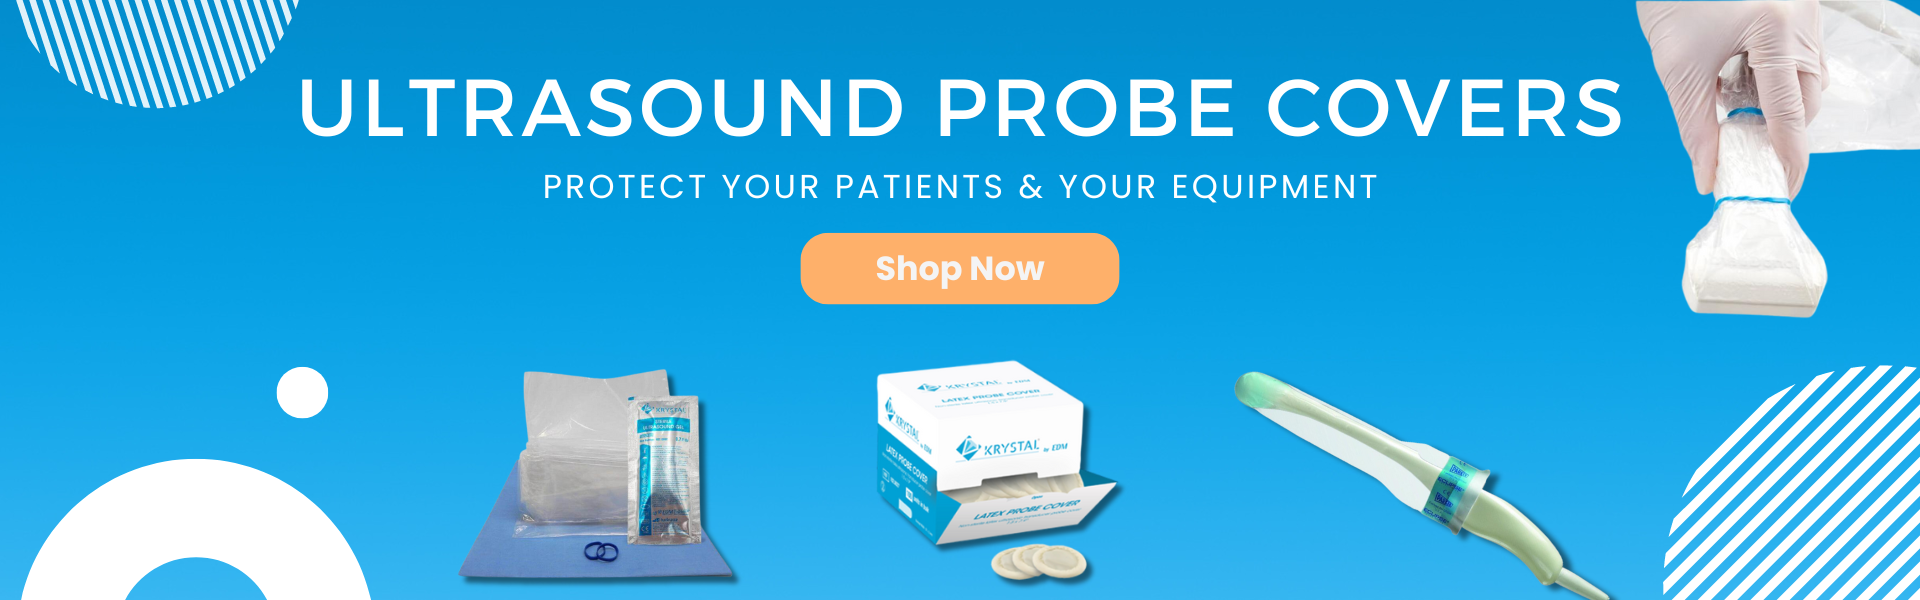 Discover our ultrasound probe covers - EDM